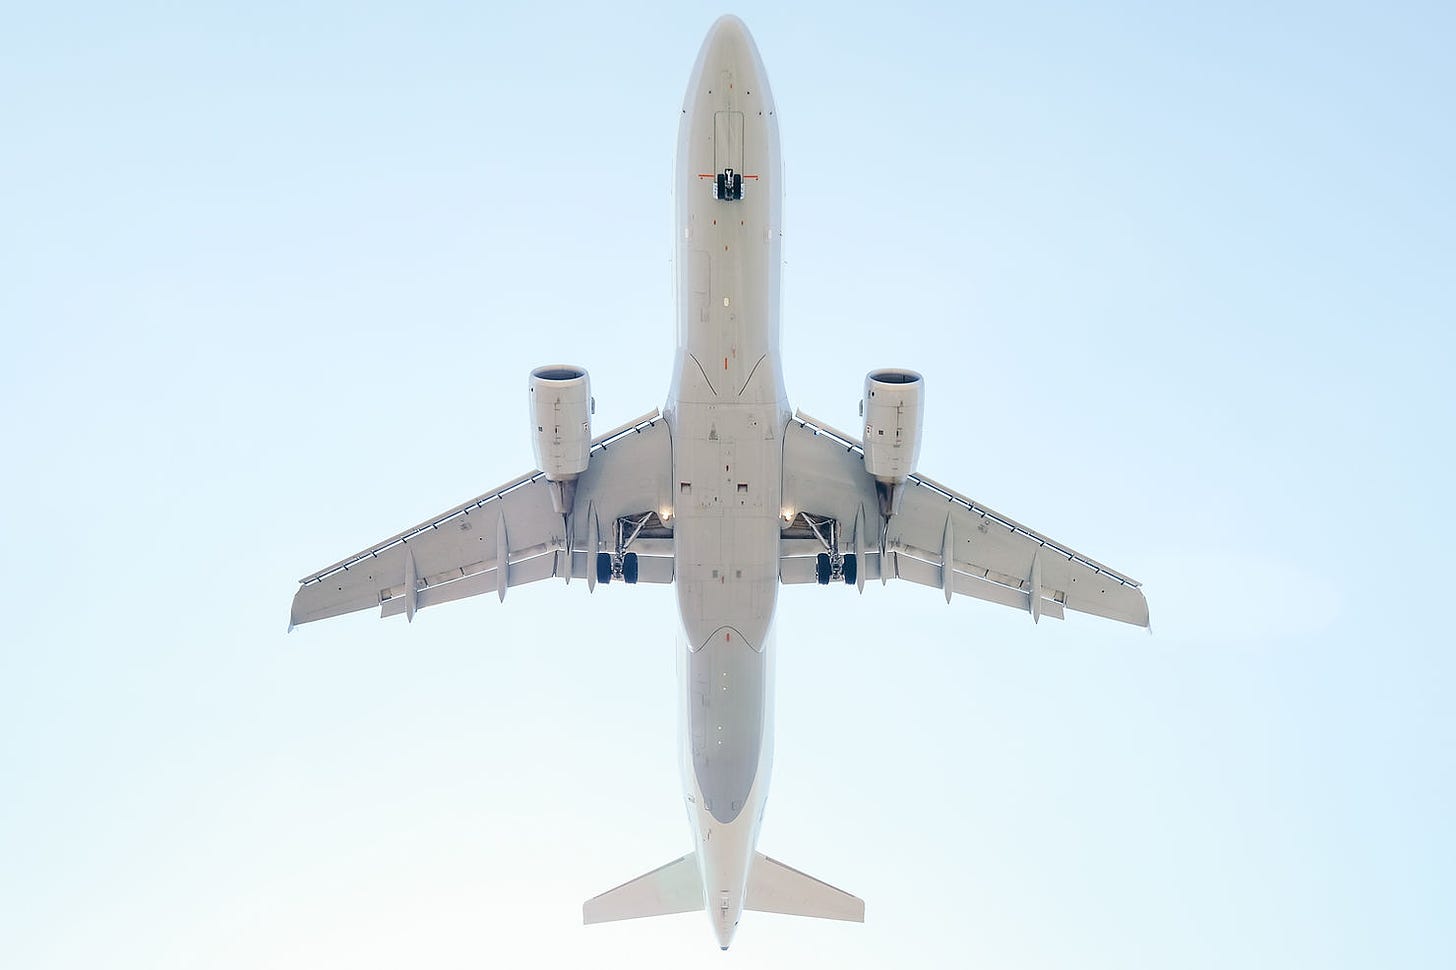 Aeroplane in flight seen from the ground